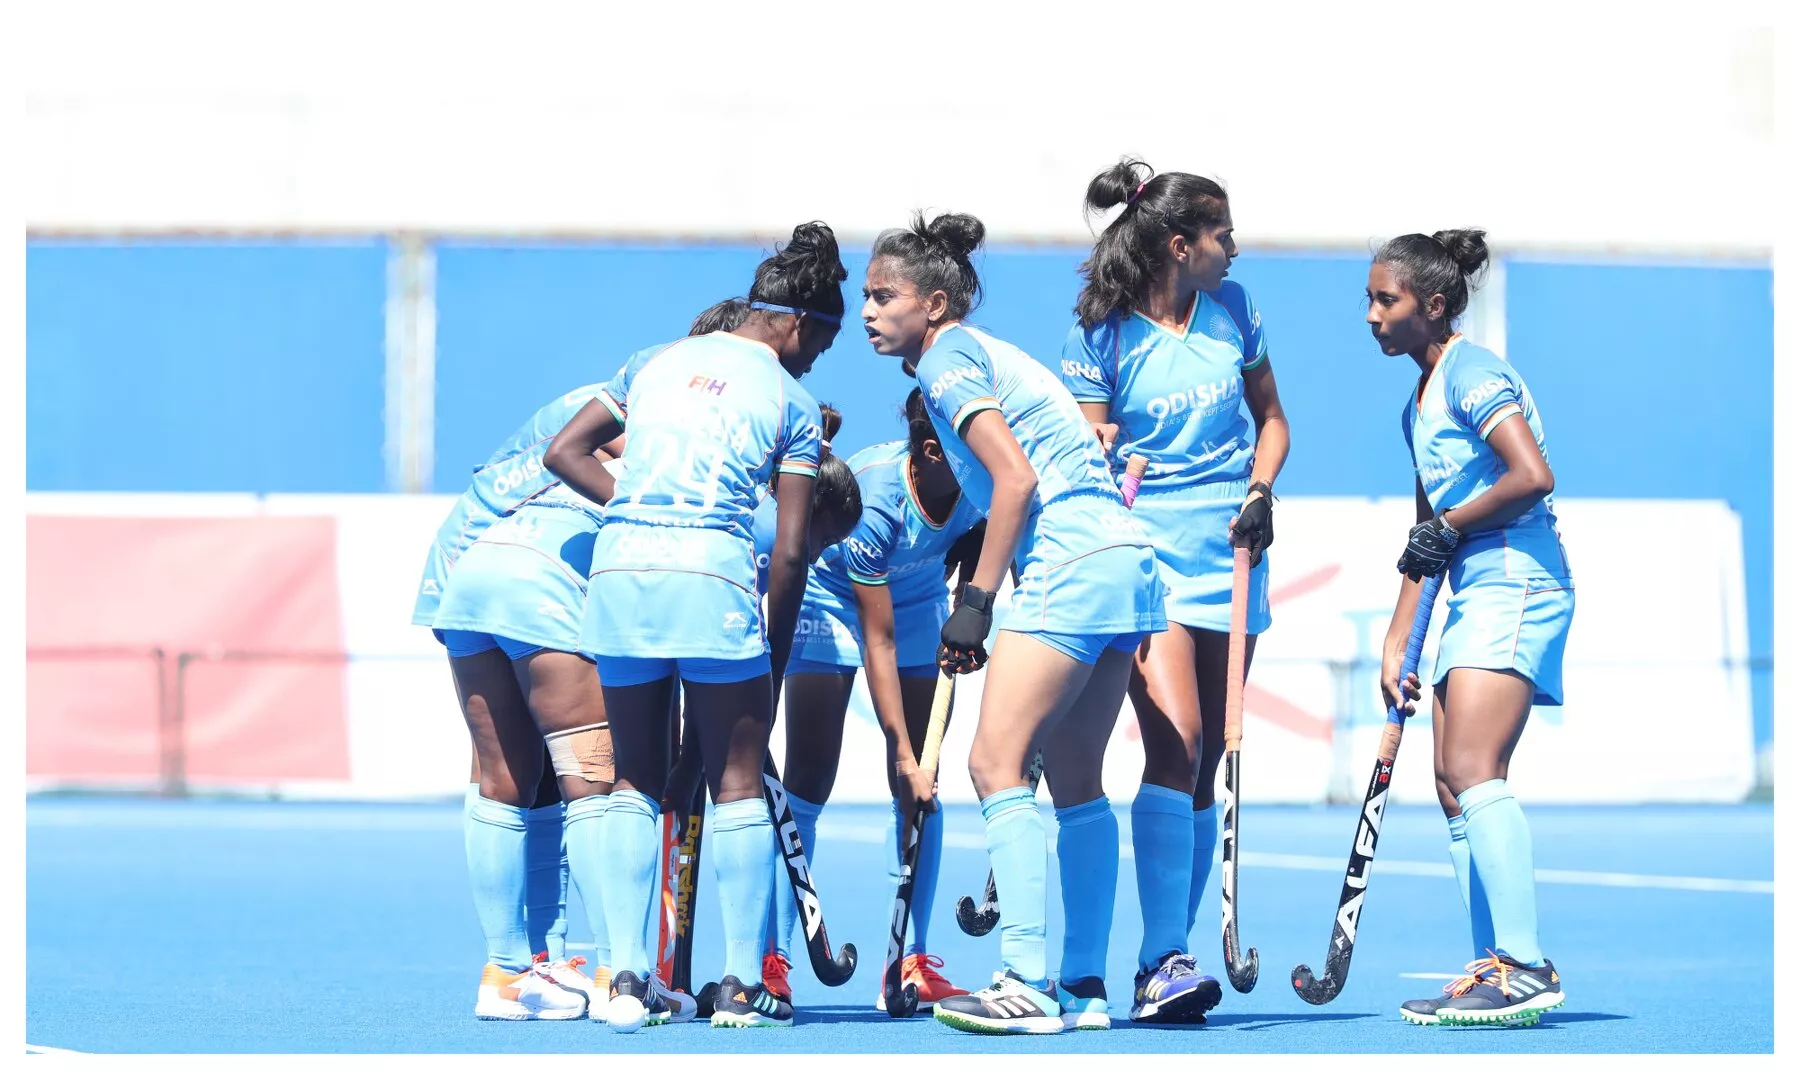 FIH Hockey Women's Junior World Cup 2023 schedule, fixtures, squad, match timings, results and telecast details